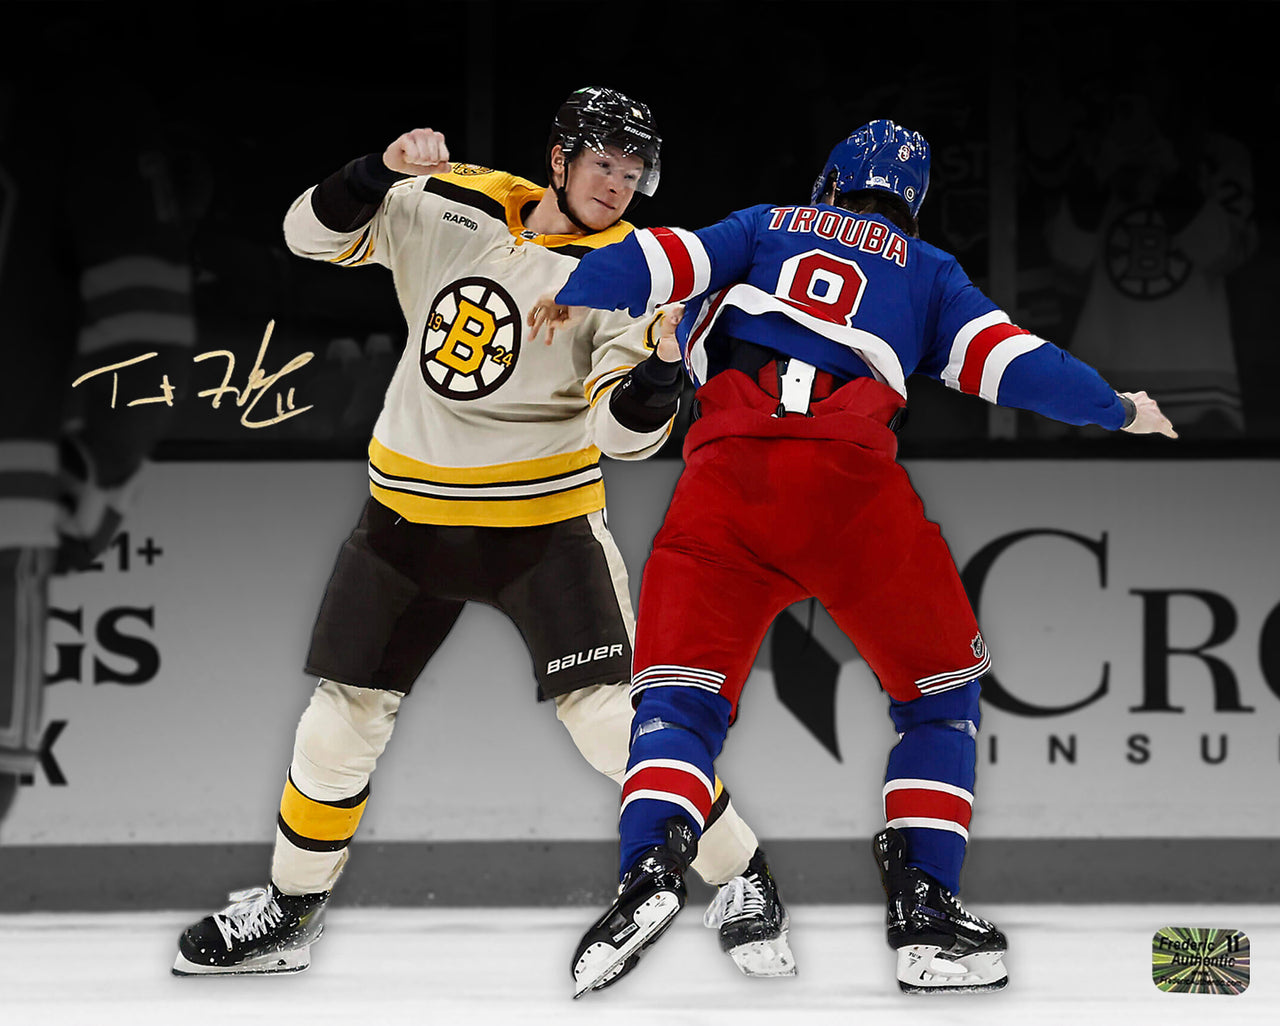 Trent Frederic Fighting Action Boston Bruins Autographed 16" x 20" Hockey Photo